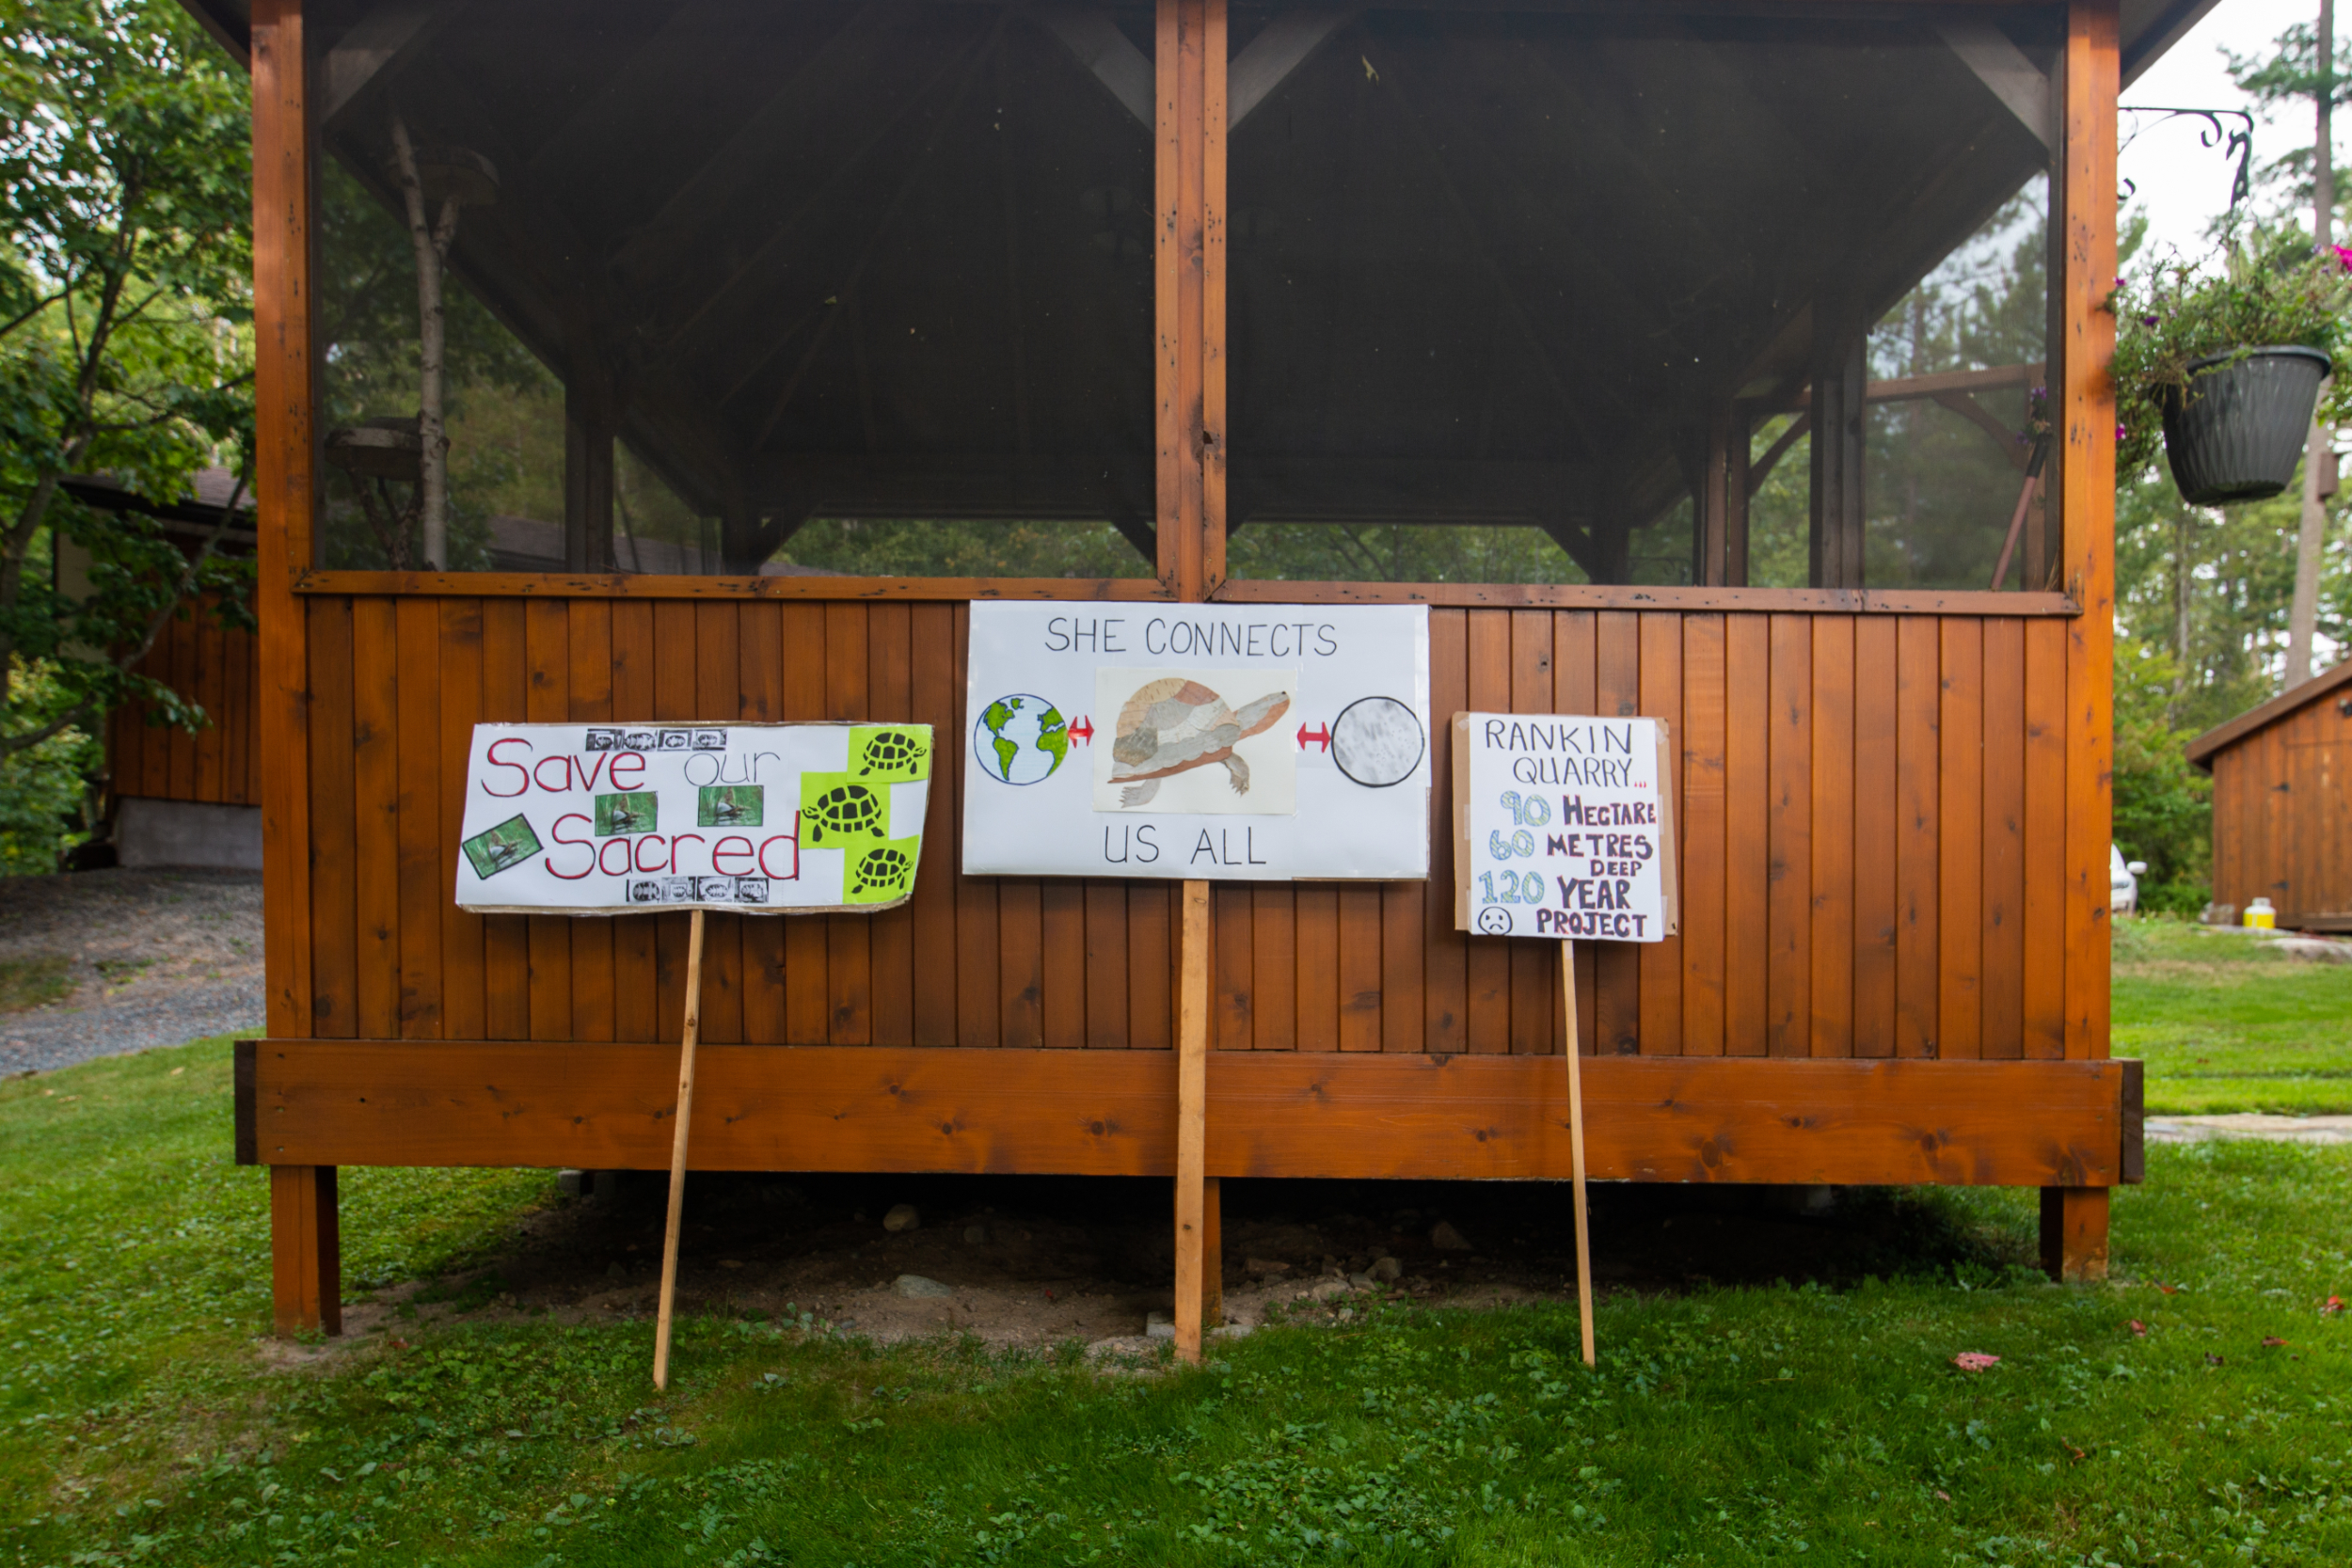 Signs reading "save our sacred turrtles," "she connects us all," and "rankin quarry, 90 hectares, 60 metres deep, 120 year project" with drawings of turtles and the earth, leaning against a gazebo